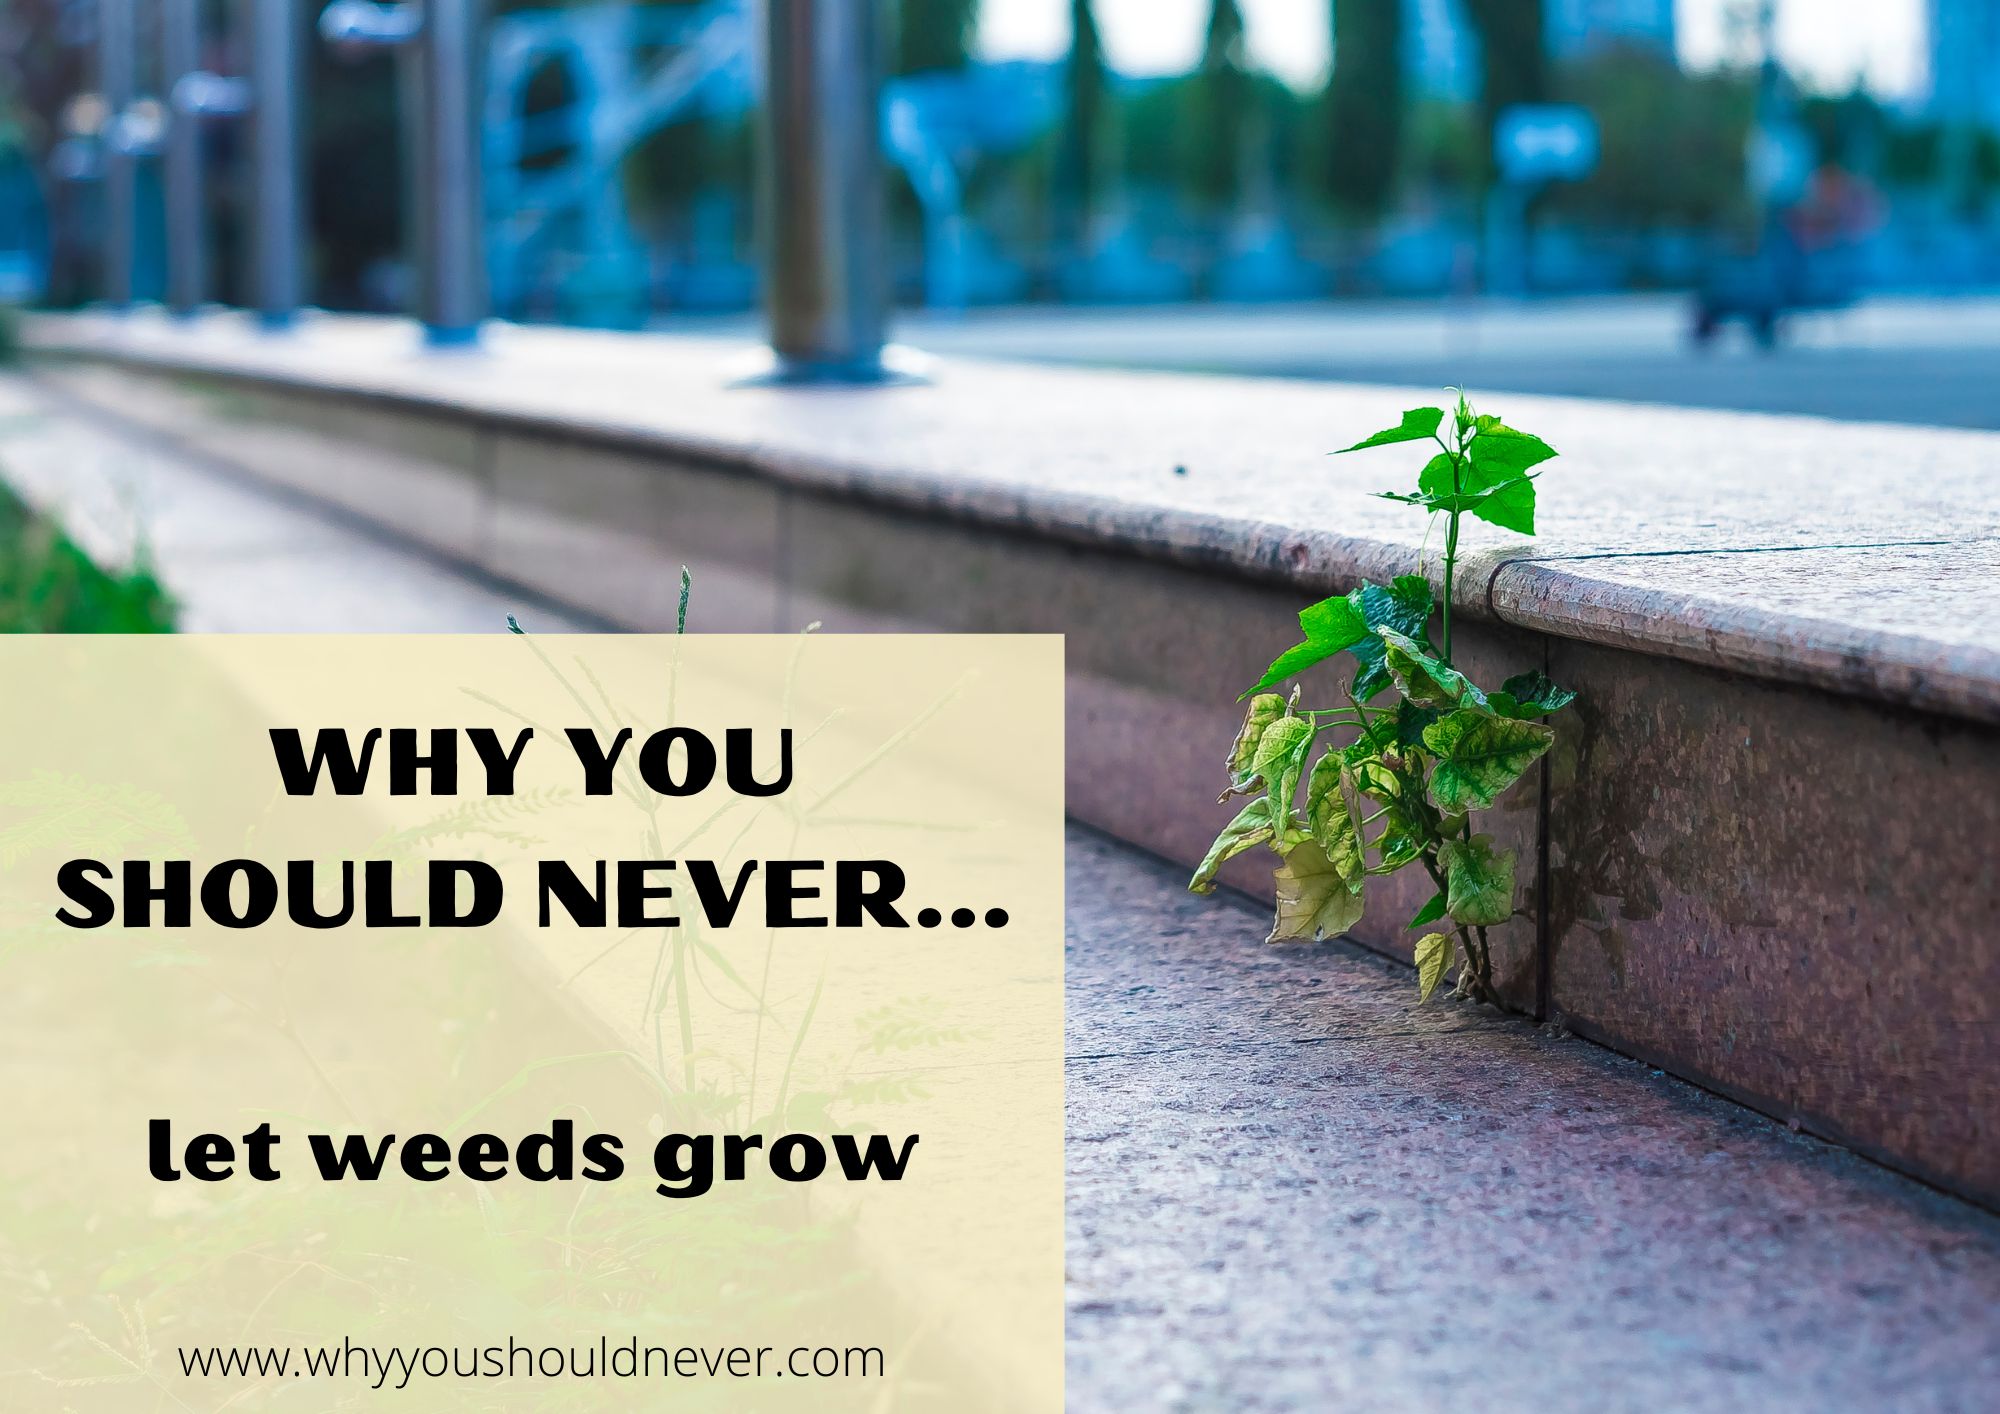 Why You Should Never Let Weeds Grow